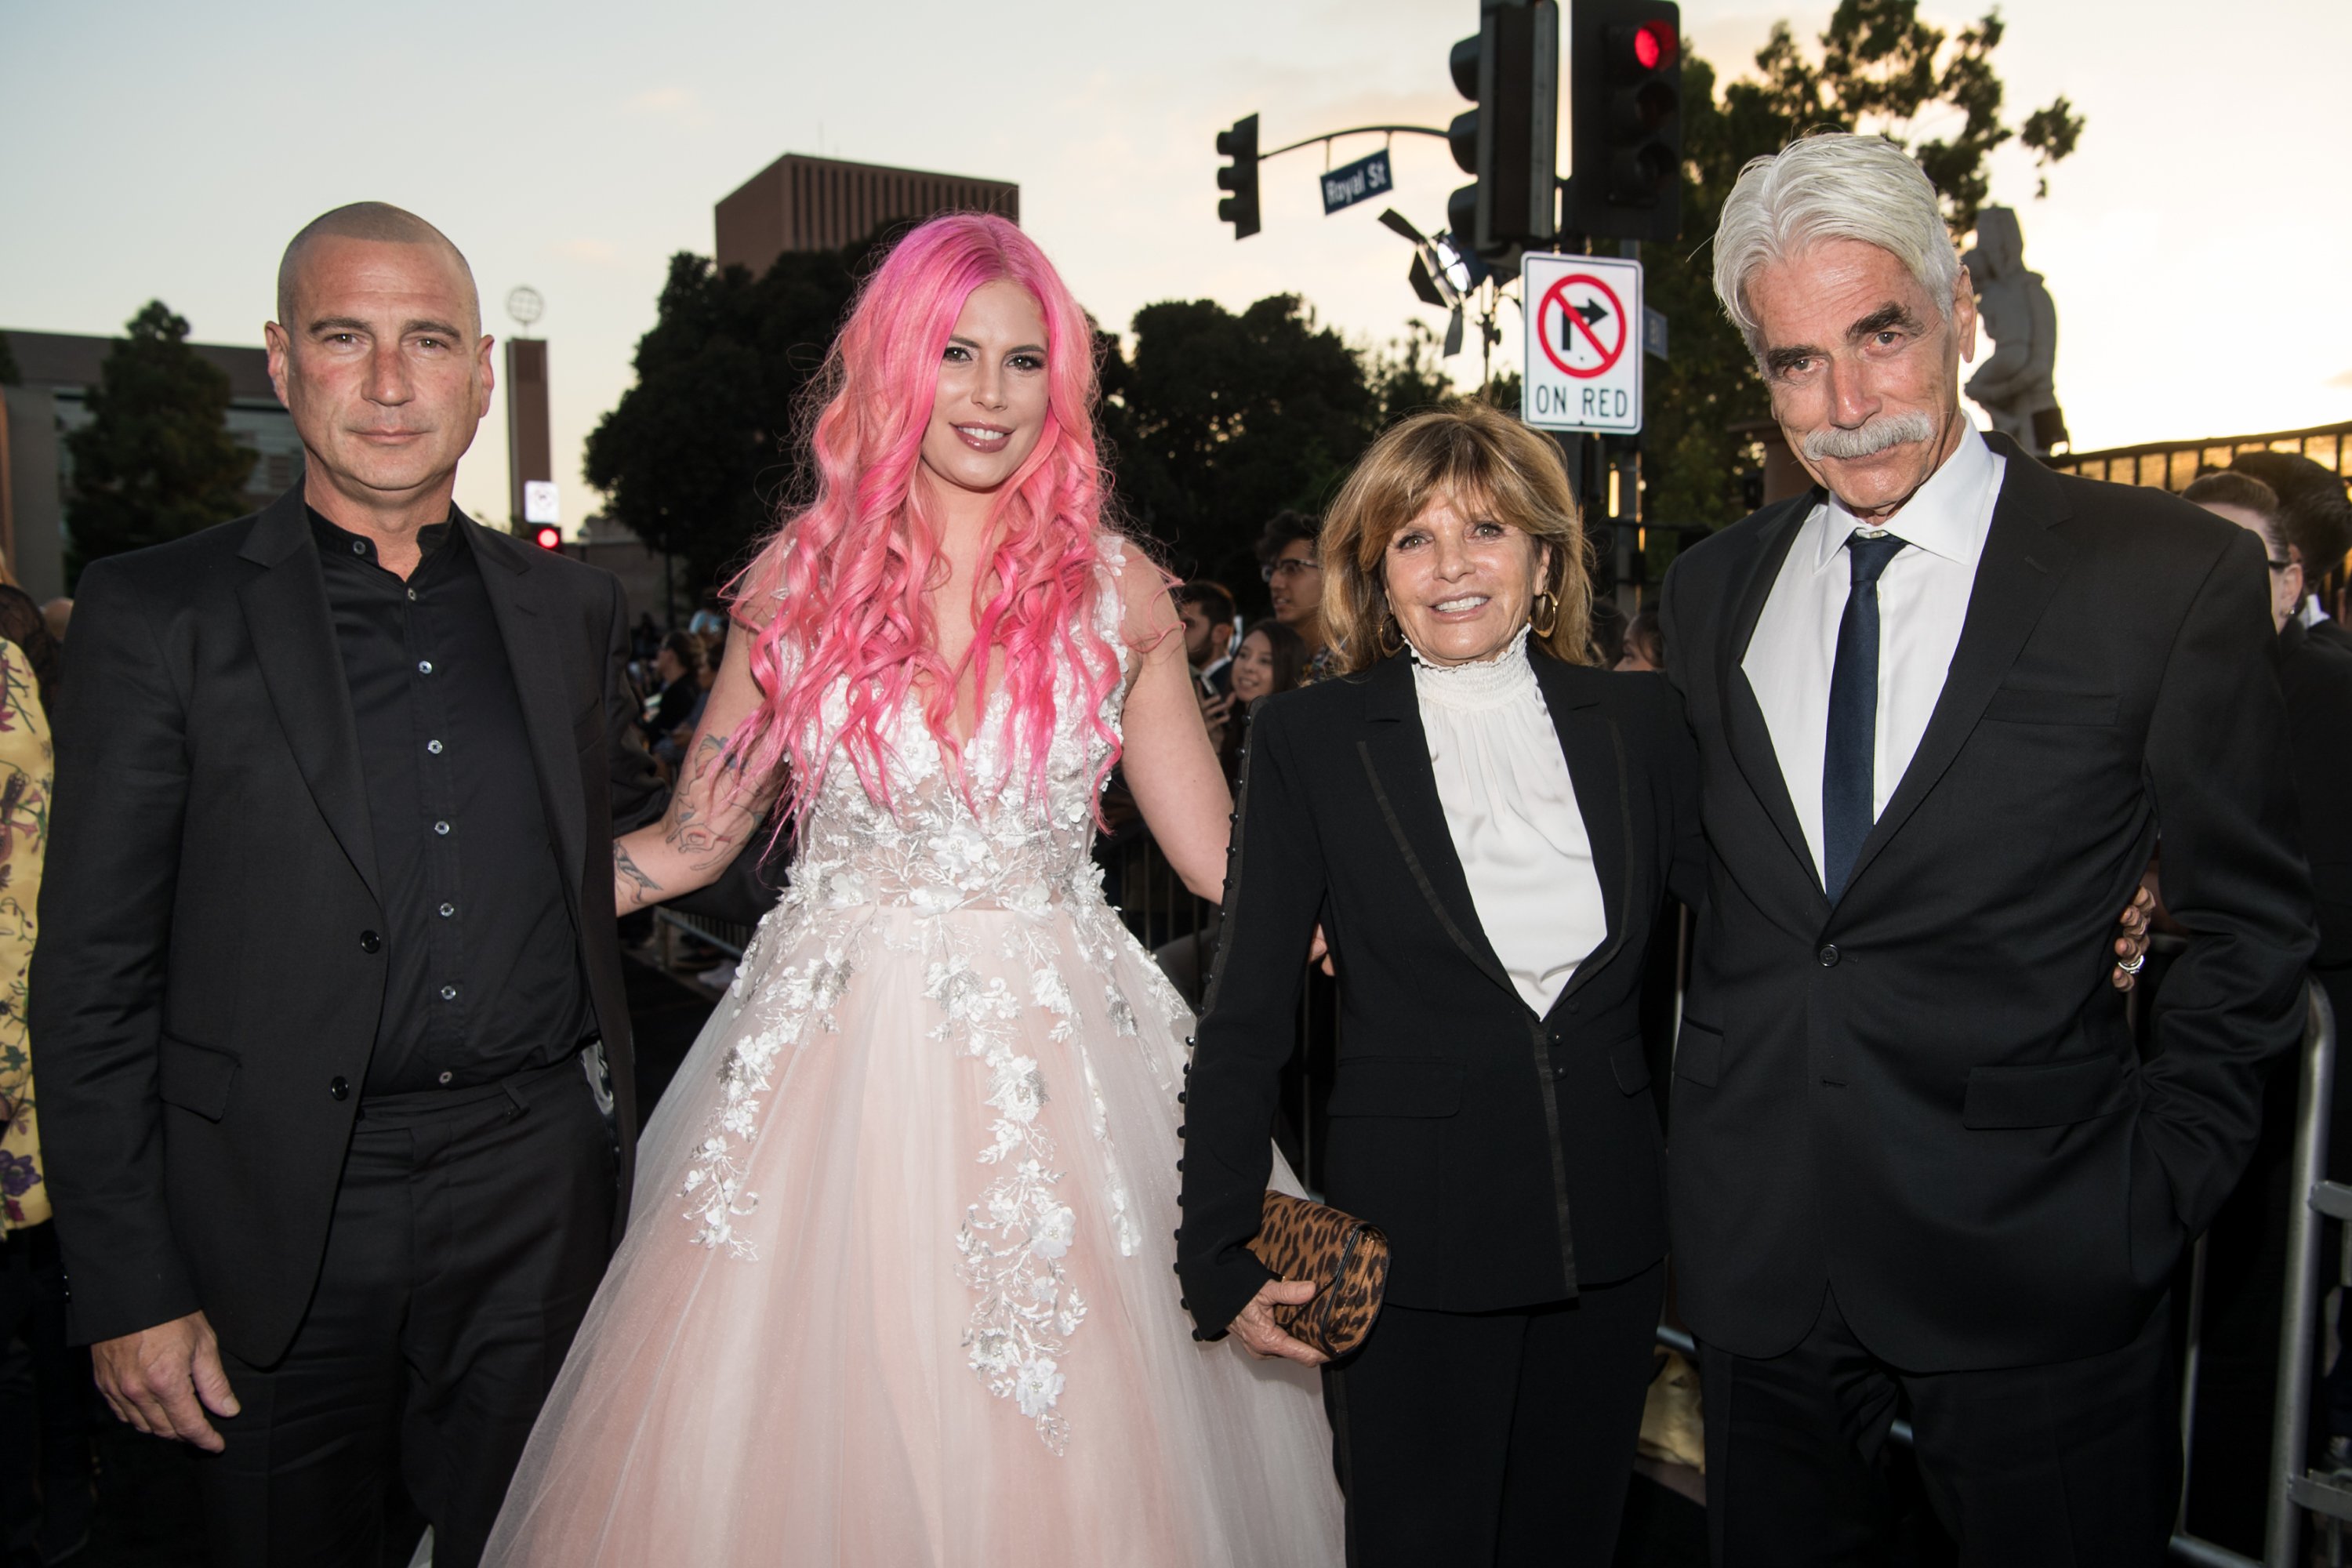 Randy Christopher, Cleo Rose Elliott, Katharine Ross and Sam Elliott attend the premiere of Warner Bros. Pictures' "A Star Is Born" at The Shrine Auditorium on September 24, 2018 in Los Angeles, California | Source: Getty Images